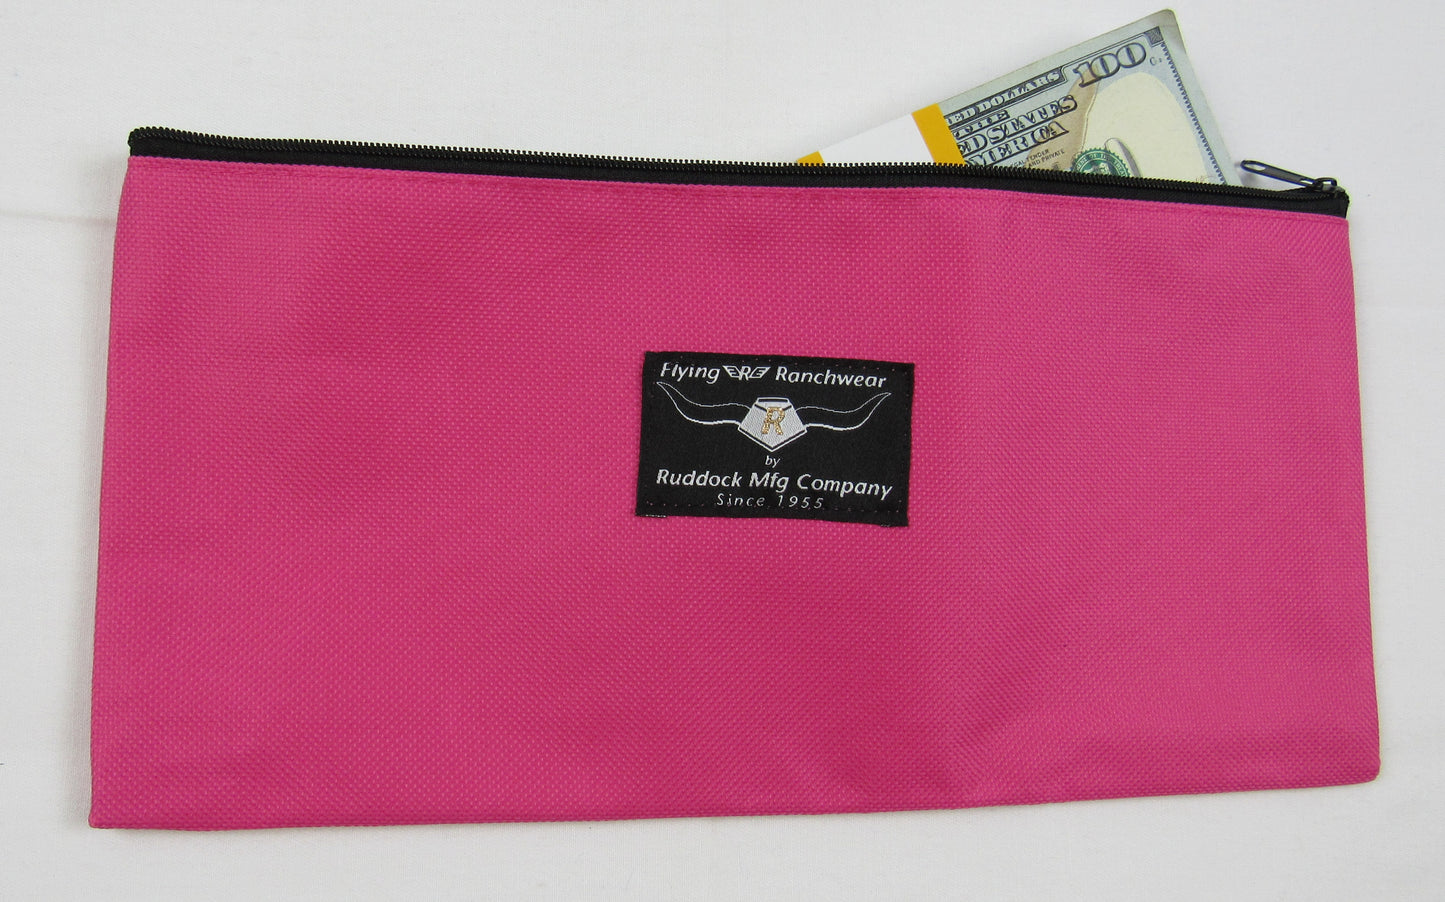 zippered gear bag in bright pink color with currency